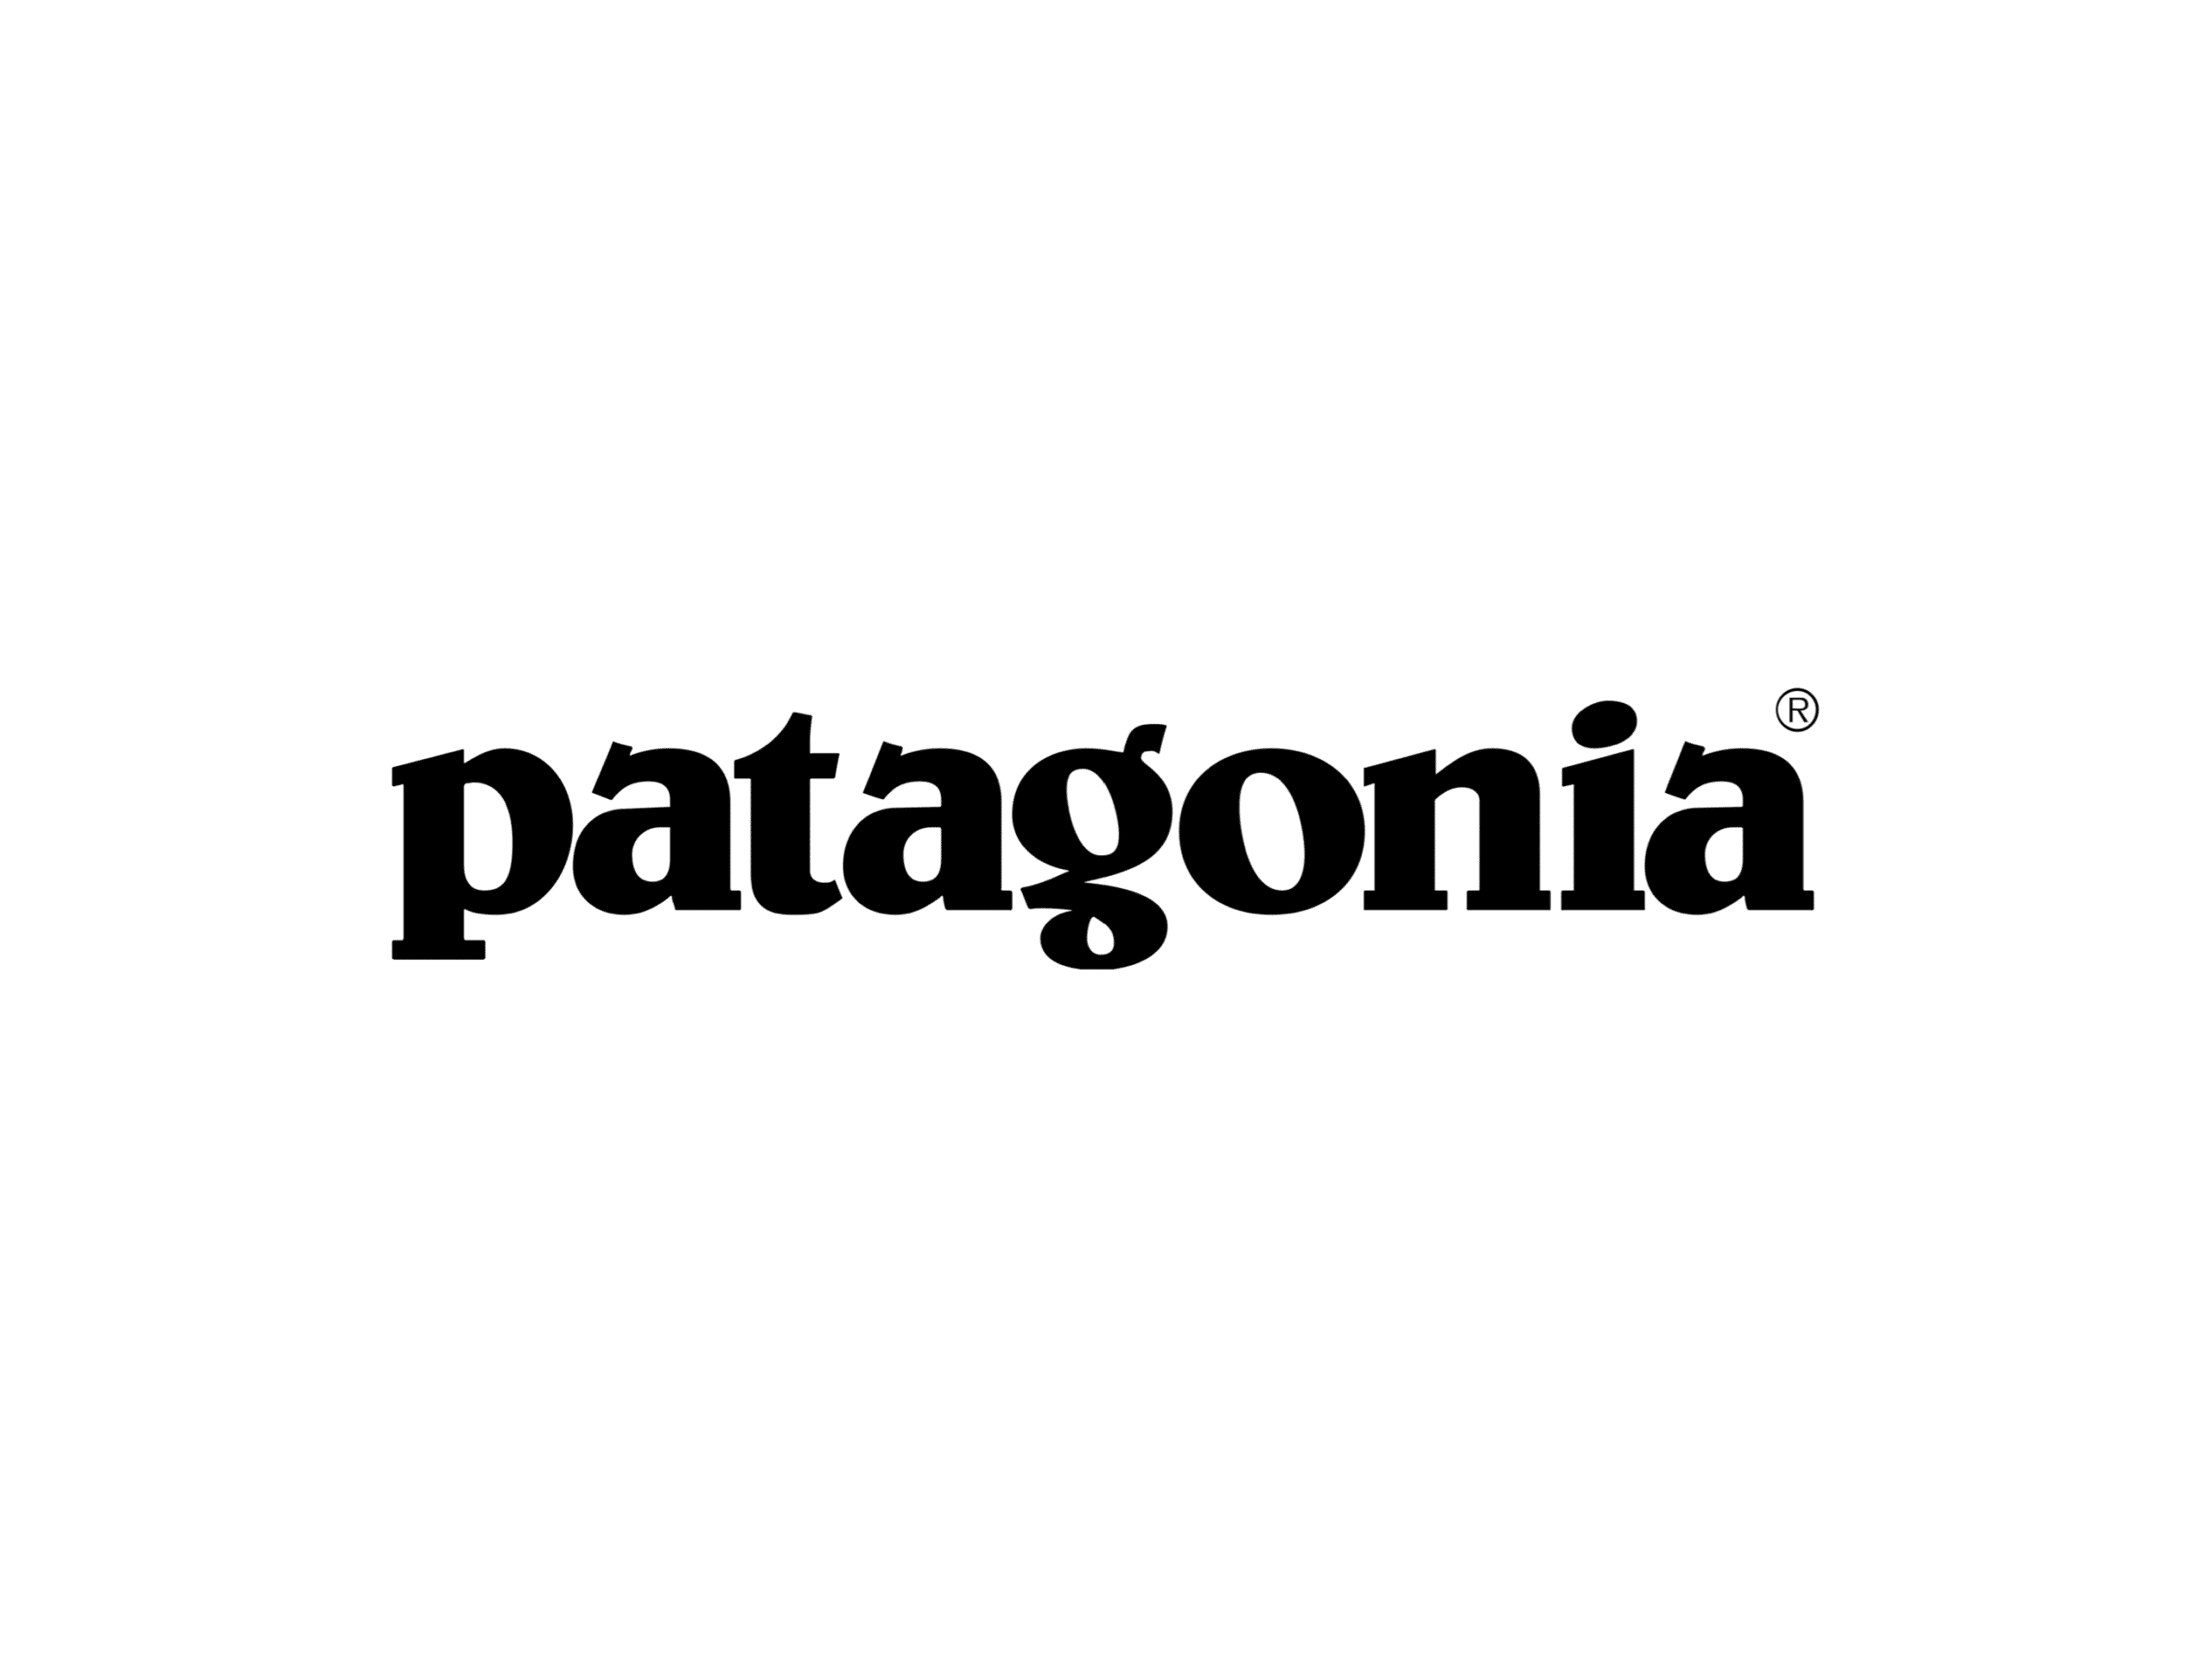 What can brands learn from Patagonia?